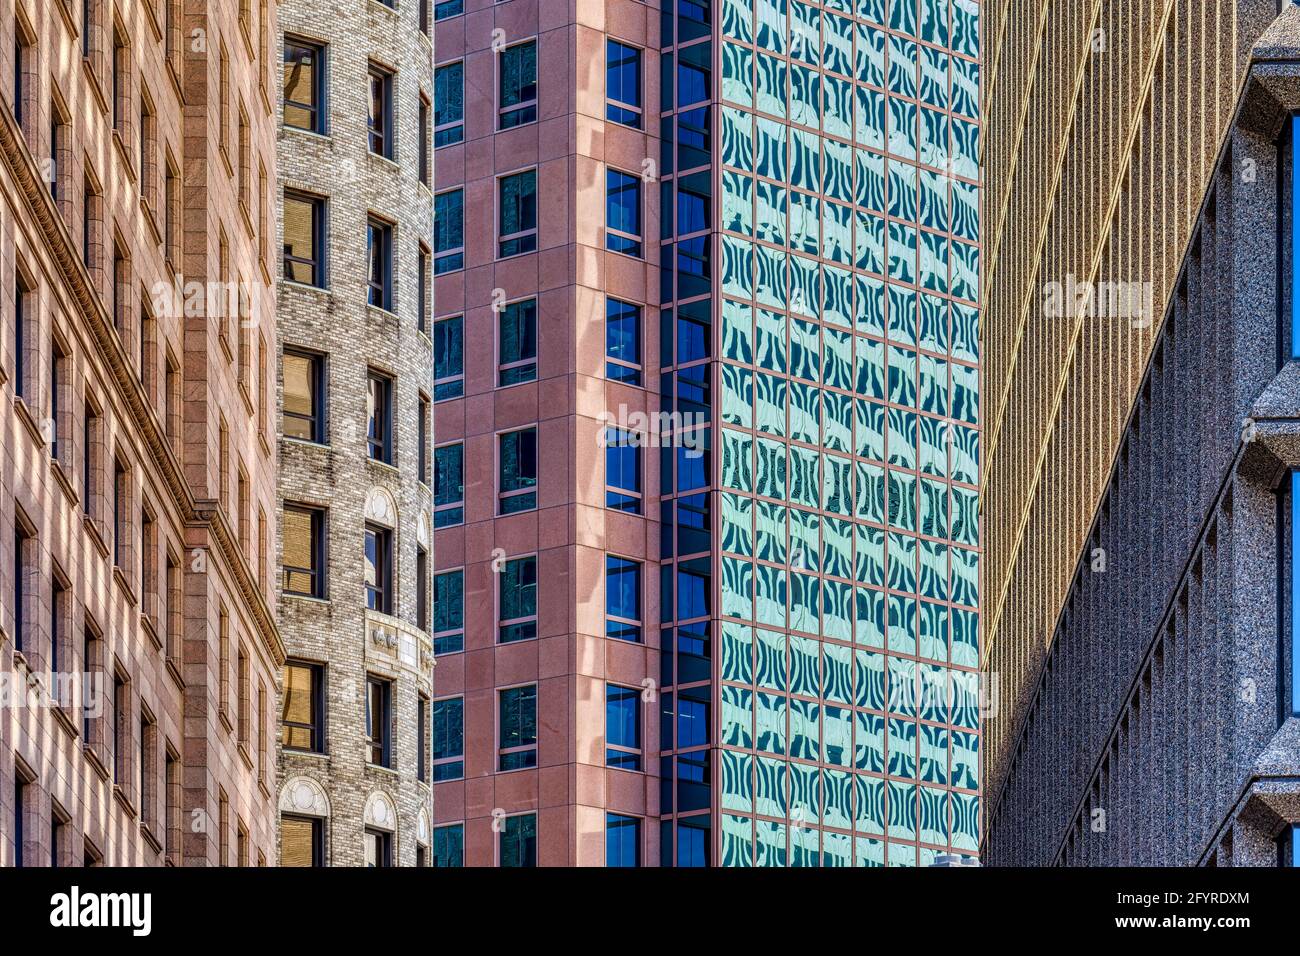 Contrasting styles: Amica Building, Turk's Head Building, Fleet Center, Old Stone Tower. Stock Photo